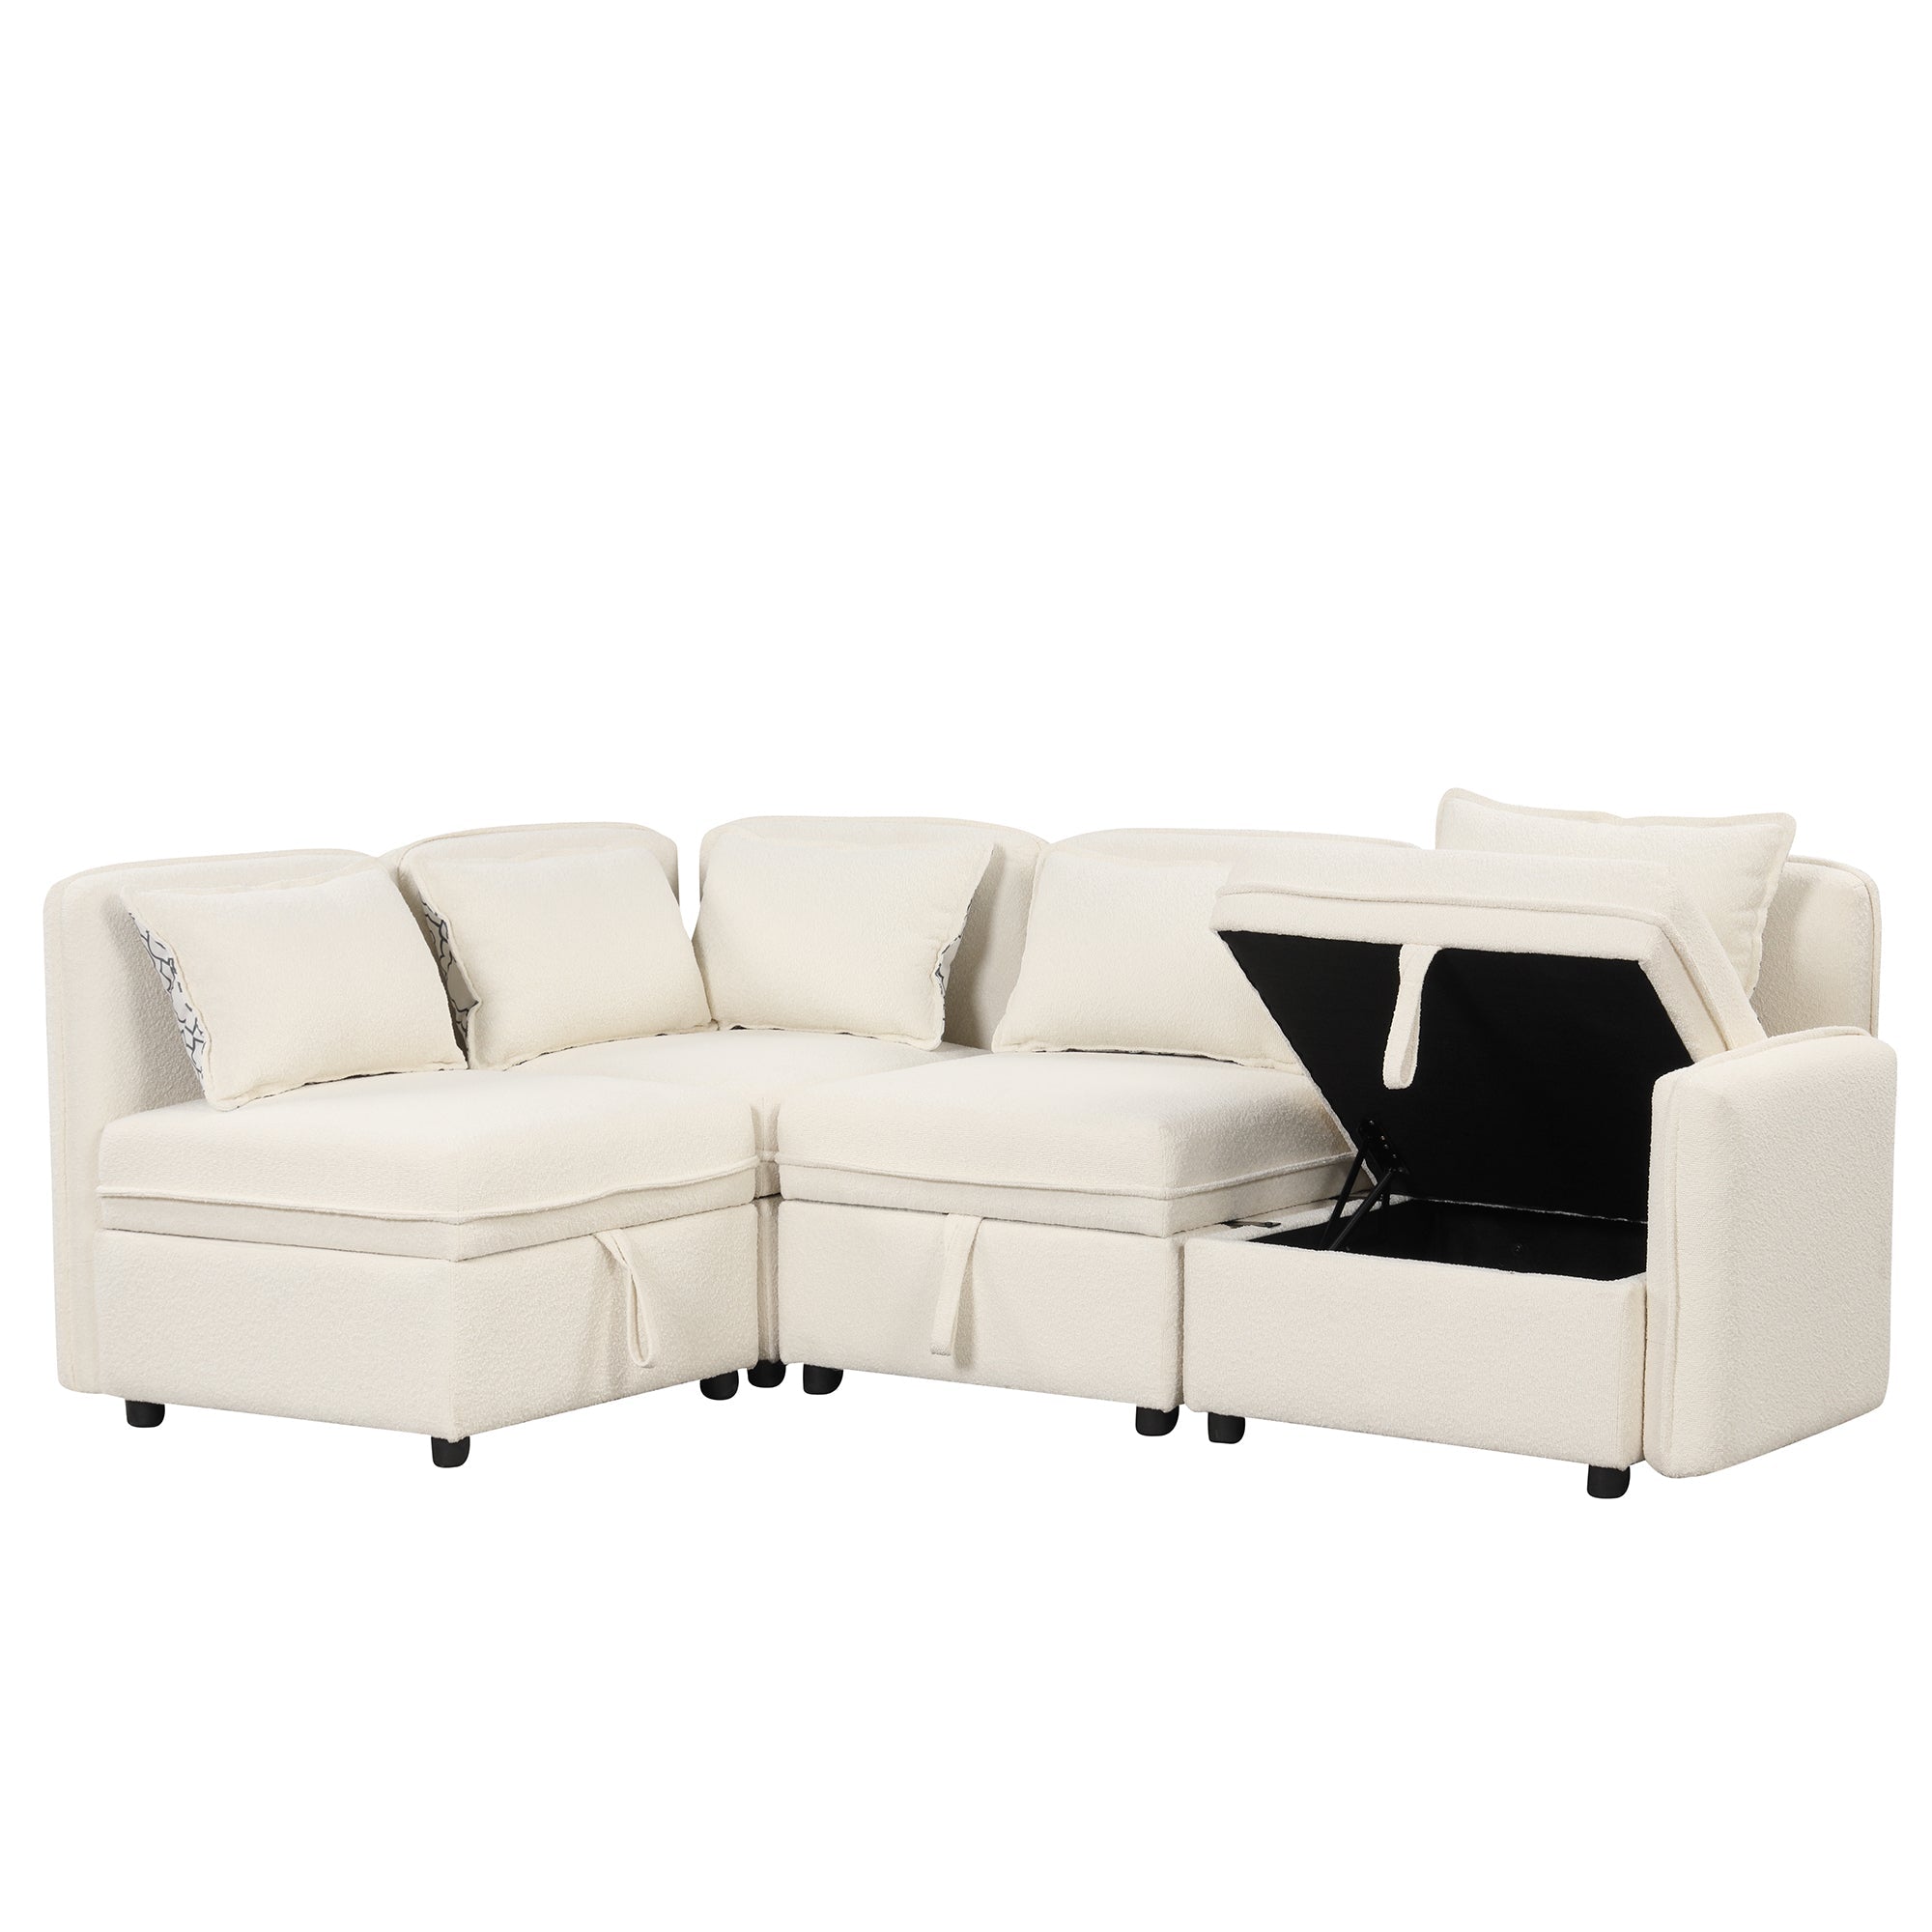 122.8" Convertible Modular Minimalist Sofa Free Combination 4 Seater Sofa Chenille Fabric Sectional sofa with 5 Pillows Cream-Stationary Sectionals-American Furniture Outlet